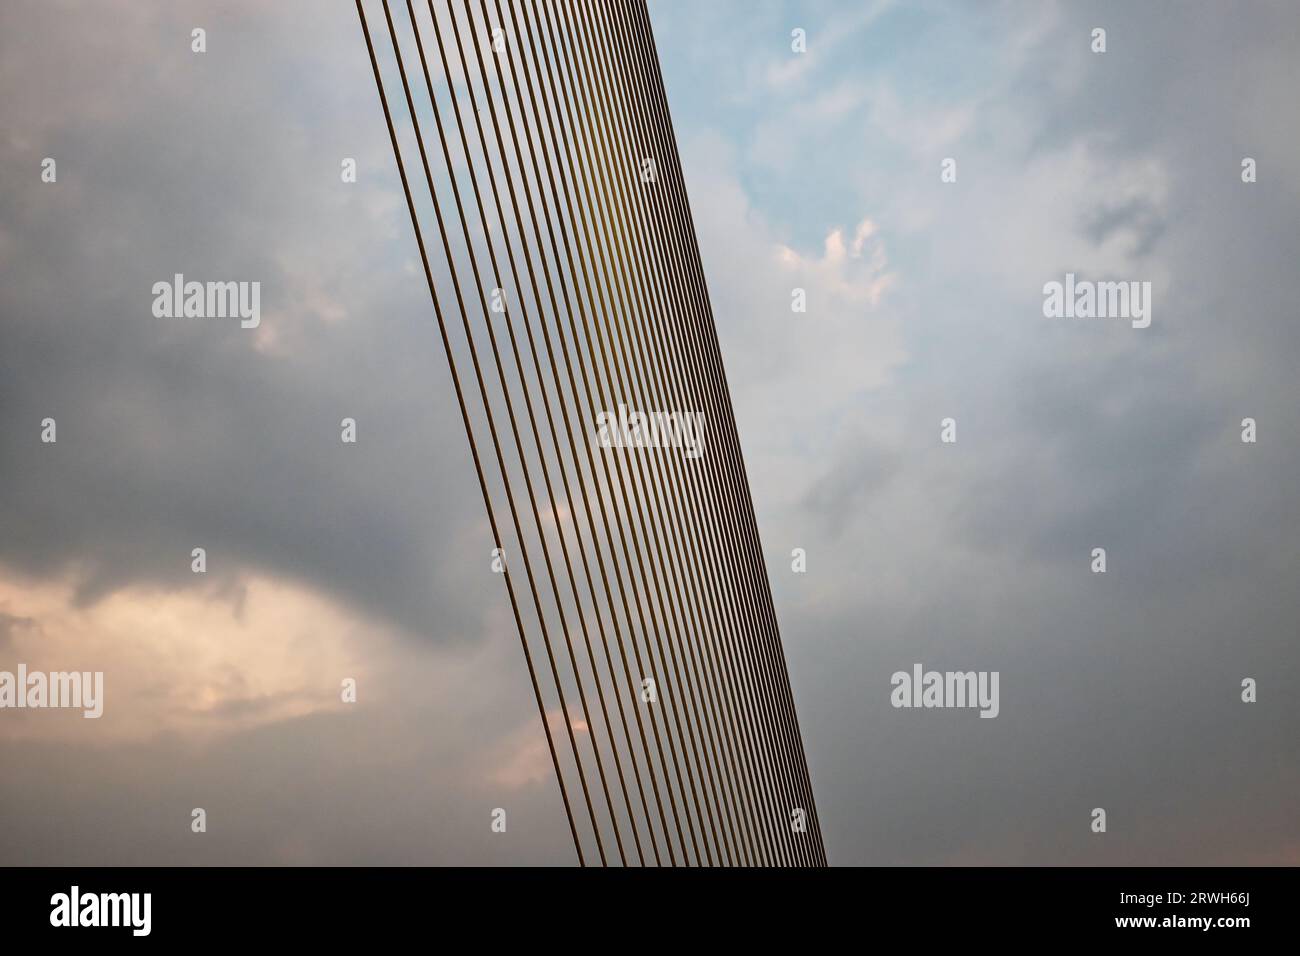 A suspension bridge cable, composed of smaller cables, extends diagonally against a cloudy sky. Stock Photo